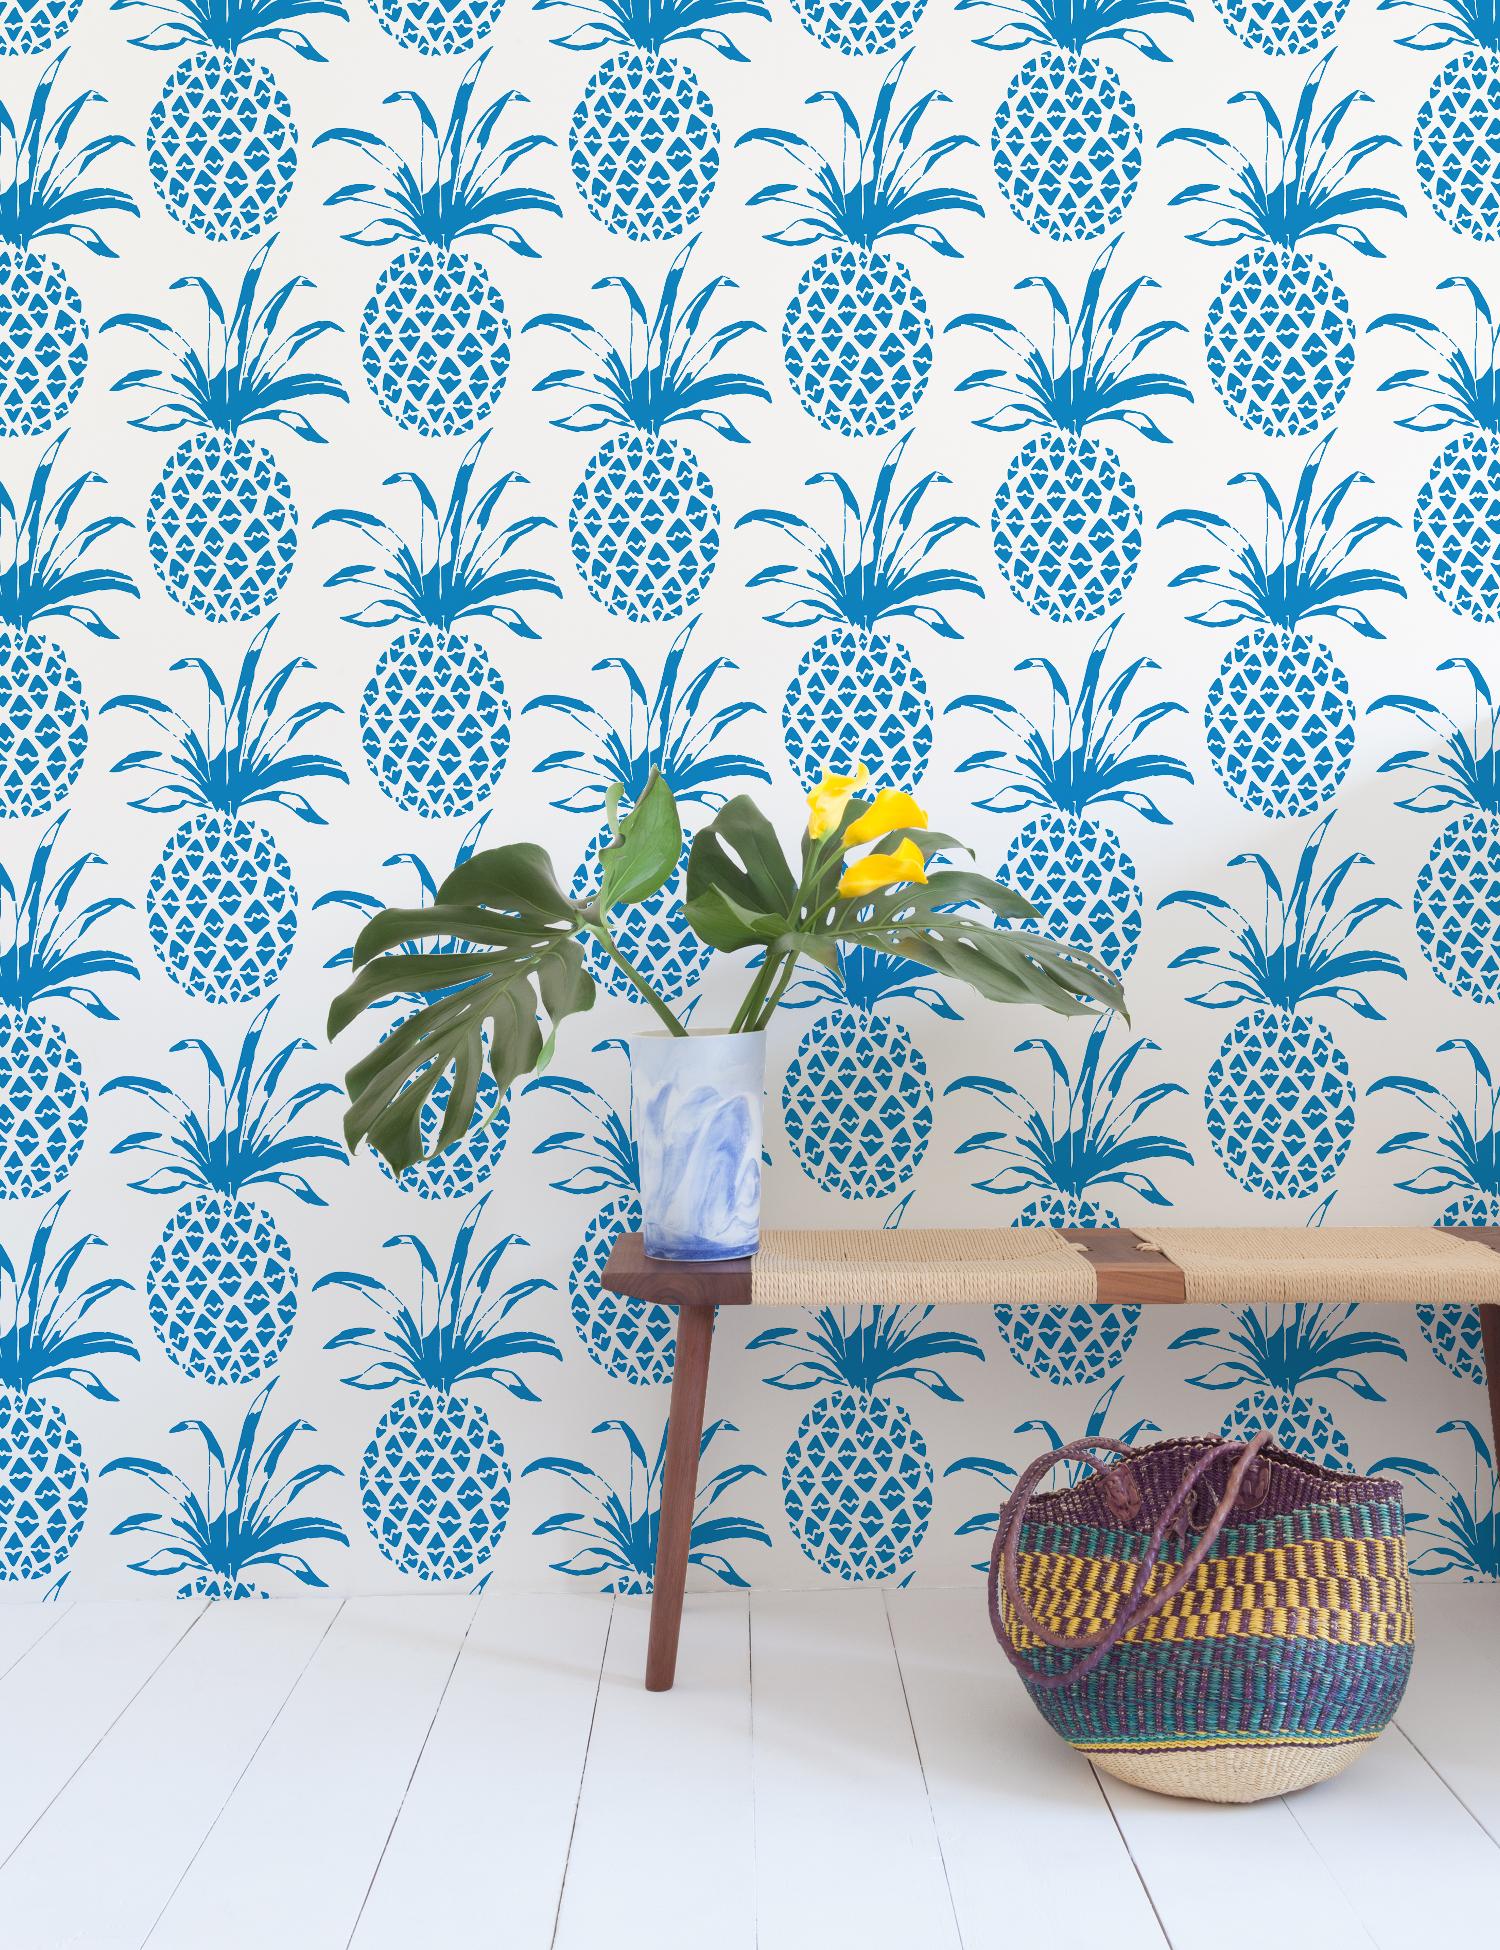 There's no better way to say welcome than with our pineapple wallpaper!
 
Samples are available for $18 including US shipping, please message us to purchase.  

Printing: Screen-printed by hand (must be ordered in even increments).
Material: